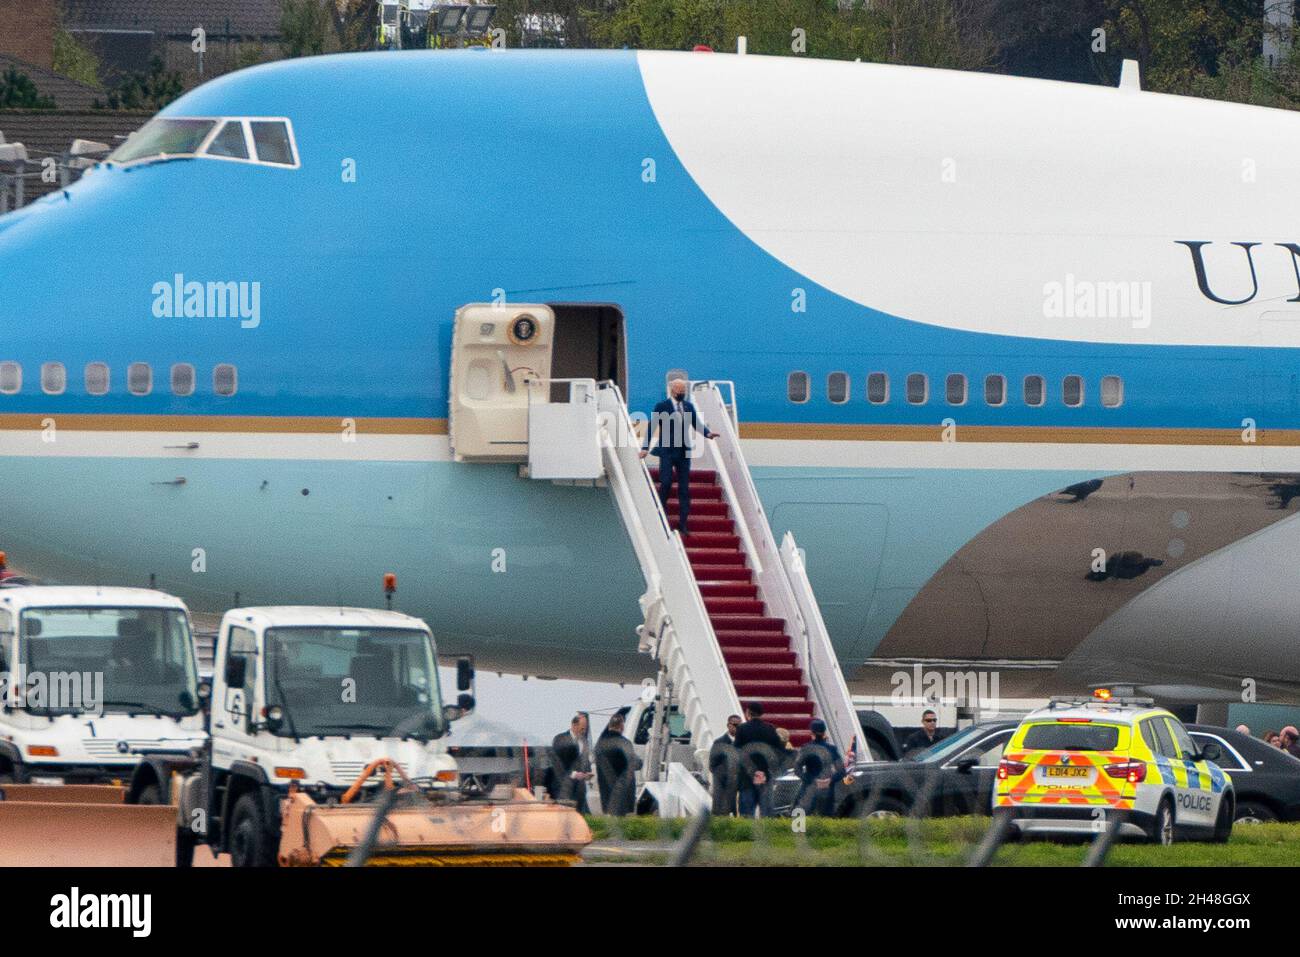 Edinburgh, Scotland, UK. 1st November 2021.  US President Joe Biden arrives at Edinburgh Airport on Air Force One to attend COP26 Climate Change Conference in Glasgow. President Biden walks down stairs of Air Force One.  Iain Masterton/Alamy Live News. Stock Photo